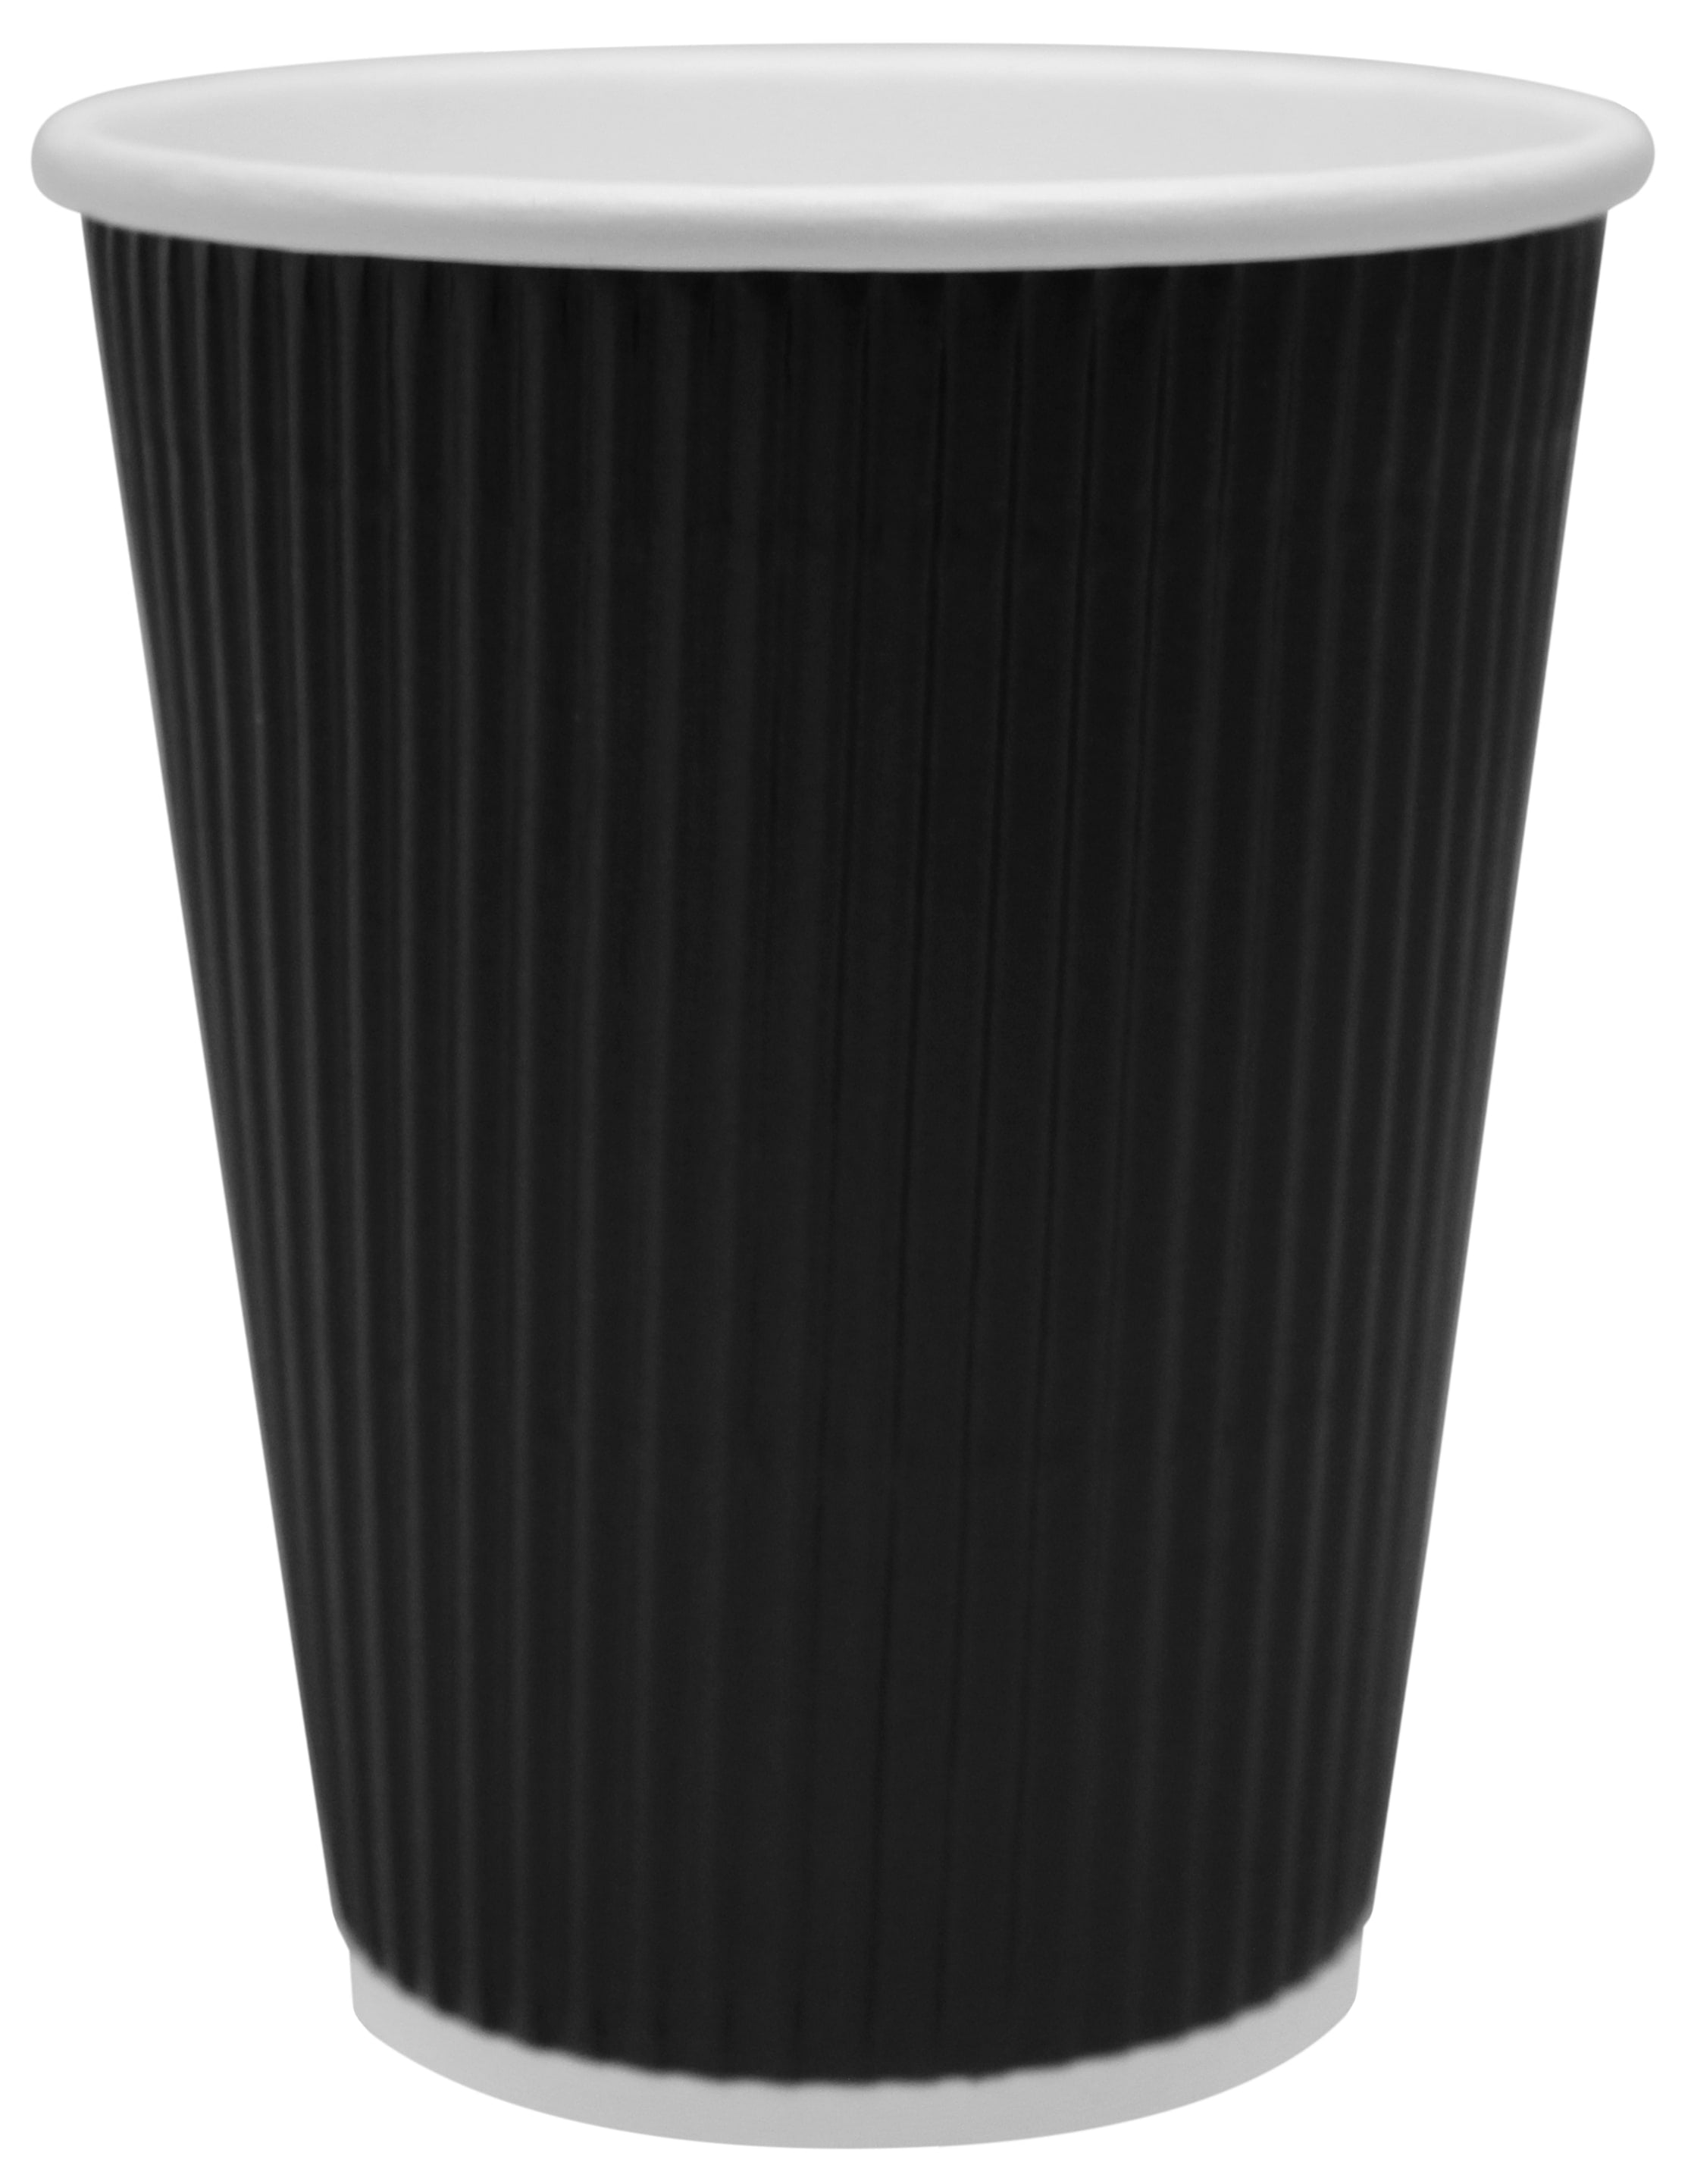 Disposable Coffee Cups - 12oz Paper Hot Cups - White (90mm